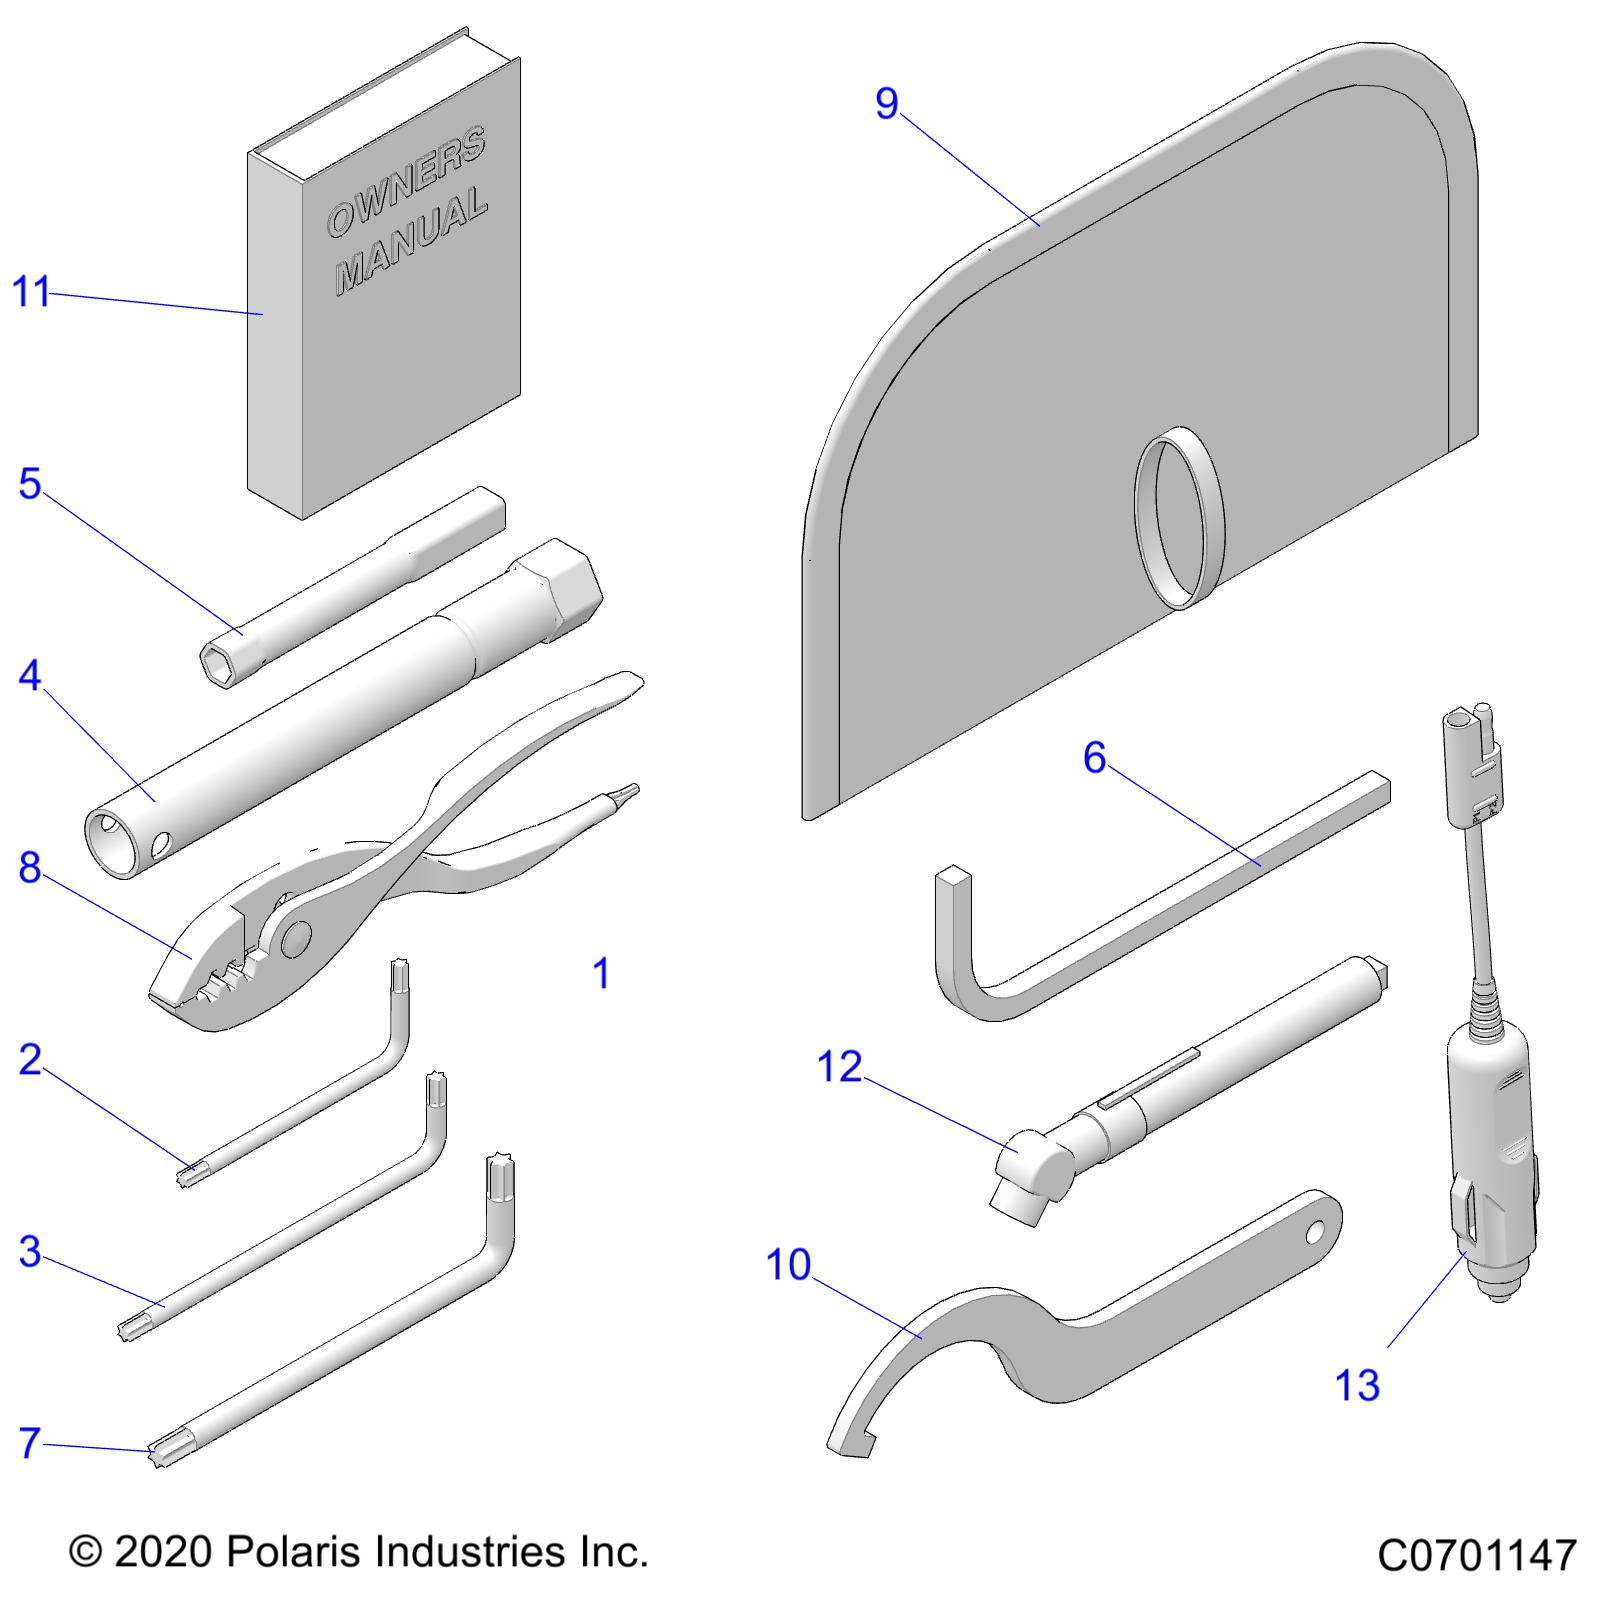 Part Number : 2881524 ACCESSORY TOOL KIT